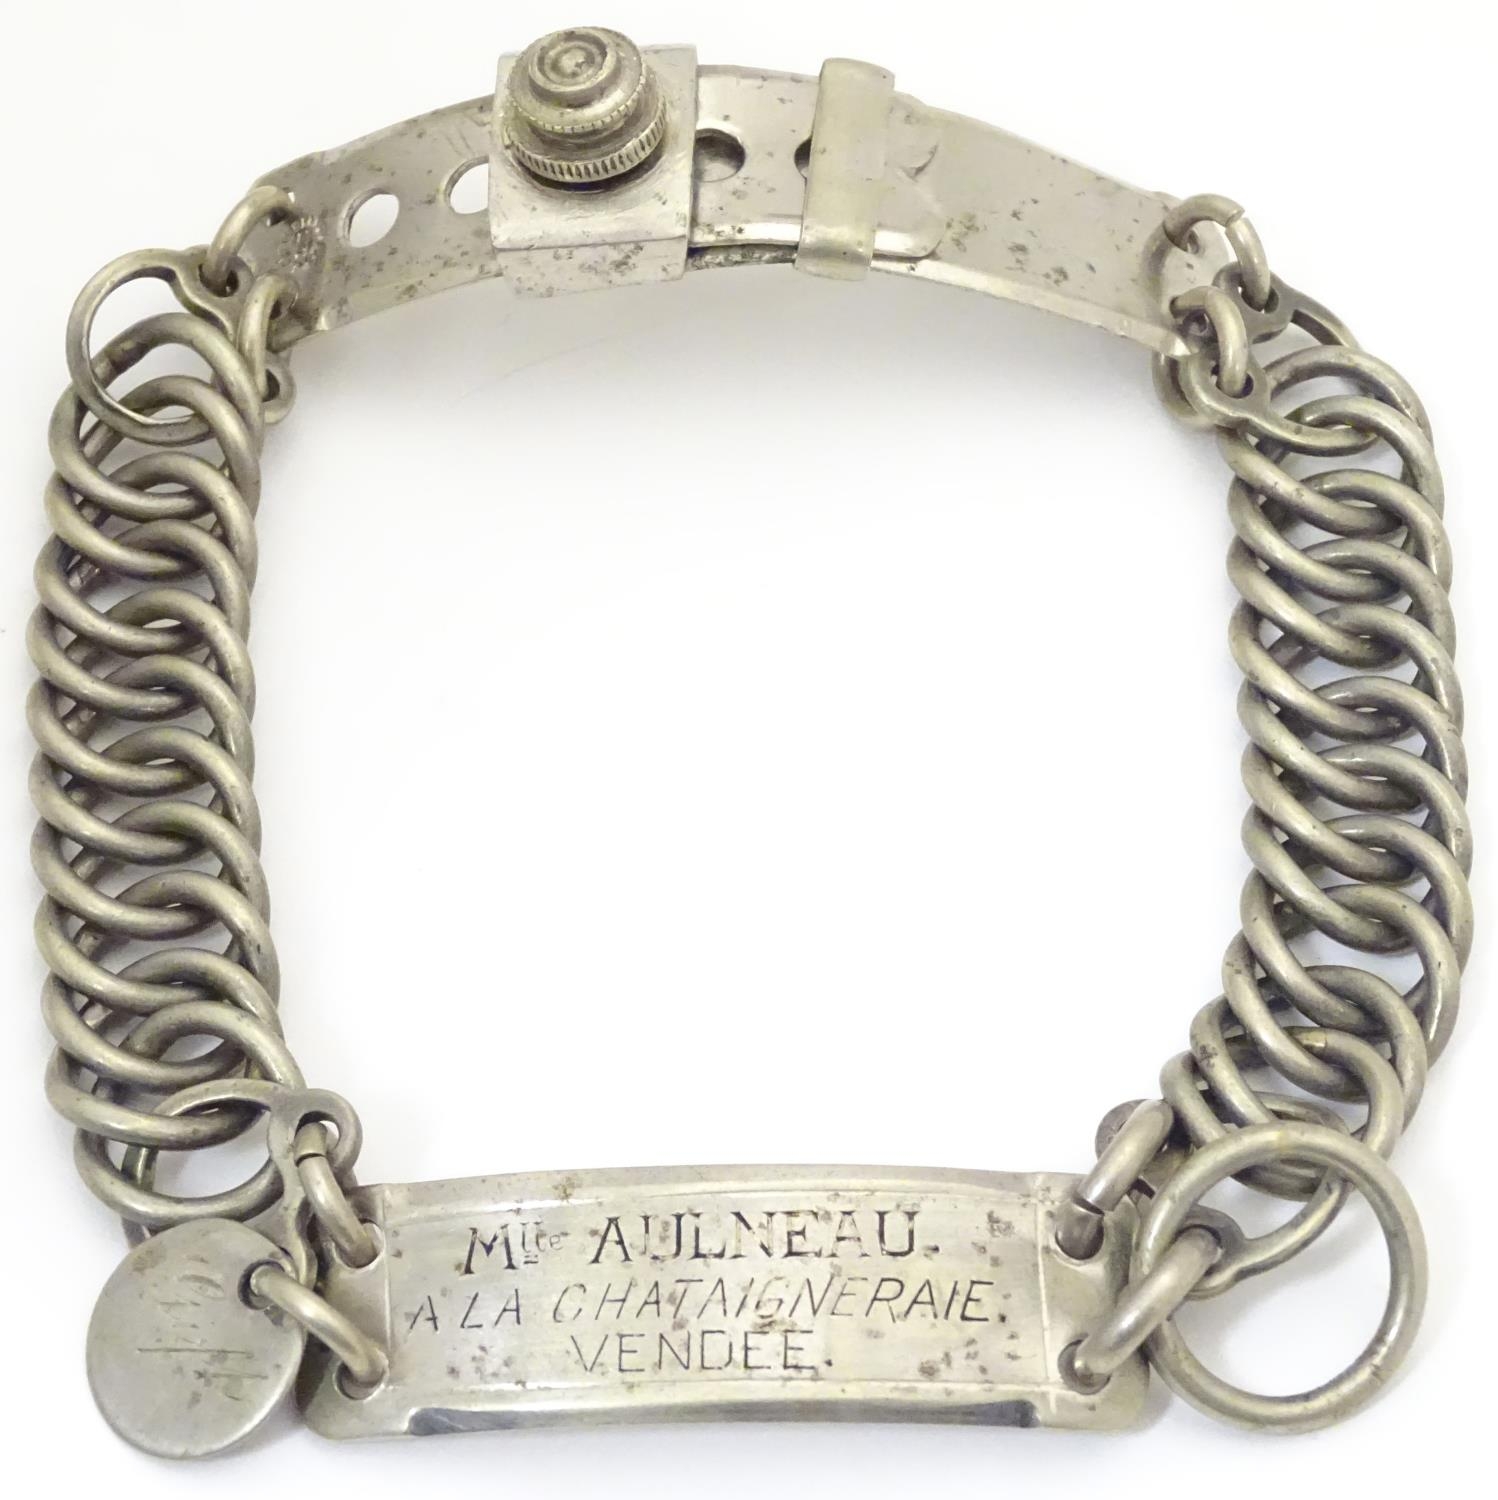 A French silver plate dog collar with chain links, adjustable clasp and engraved owner plaque. - Image 3 of 7